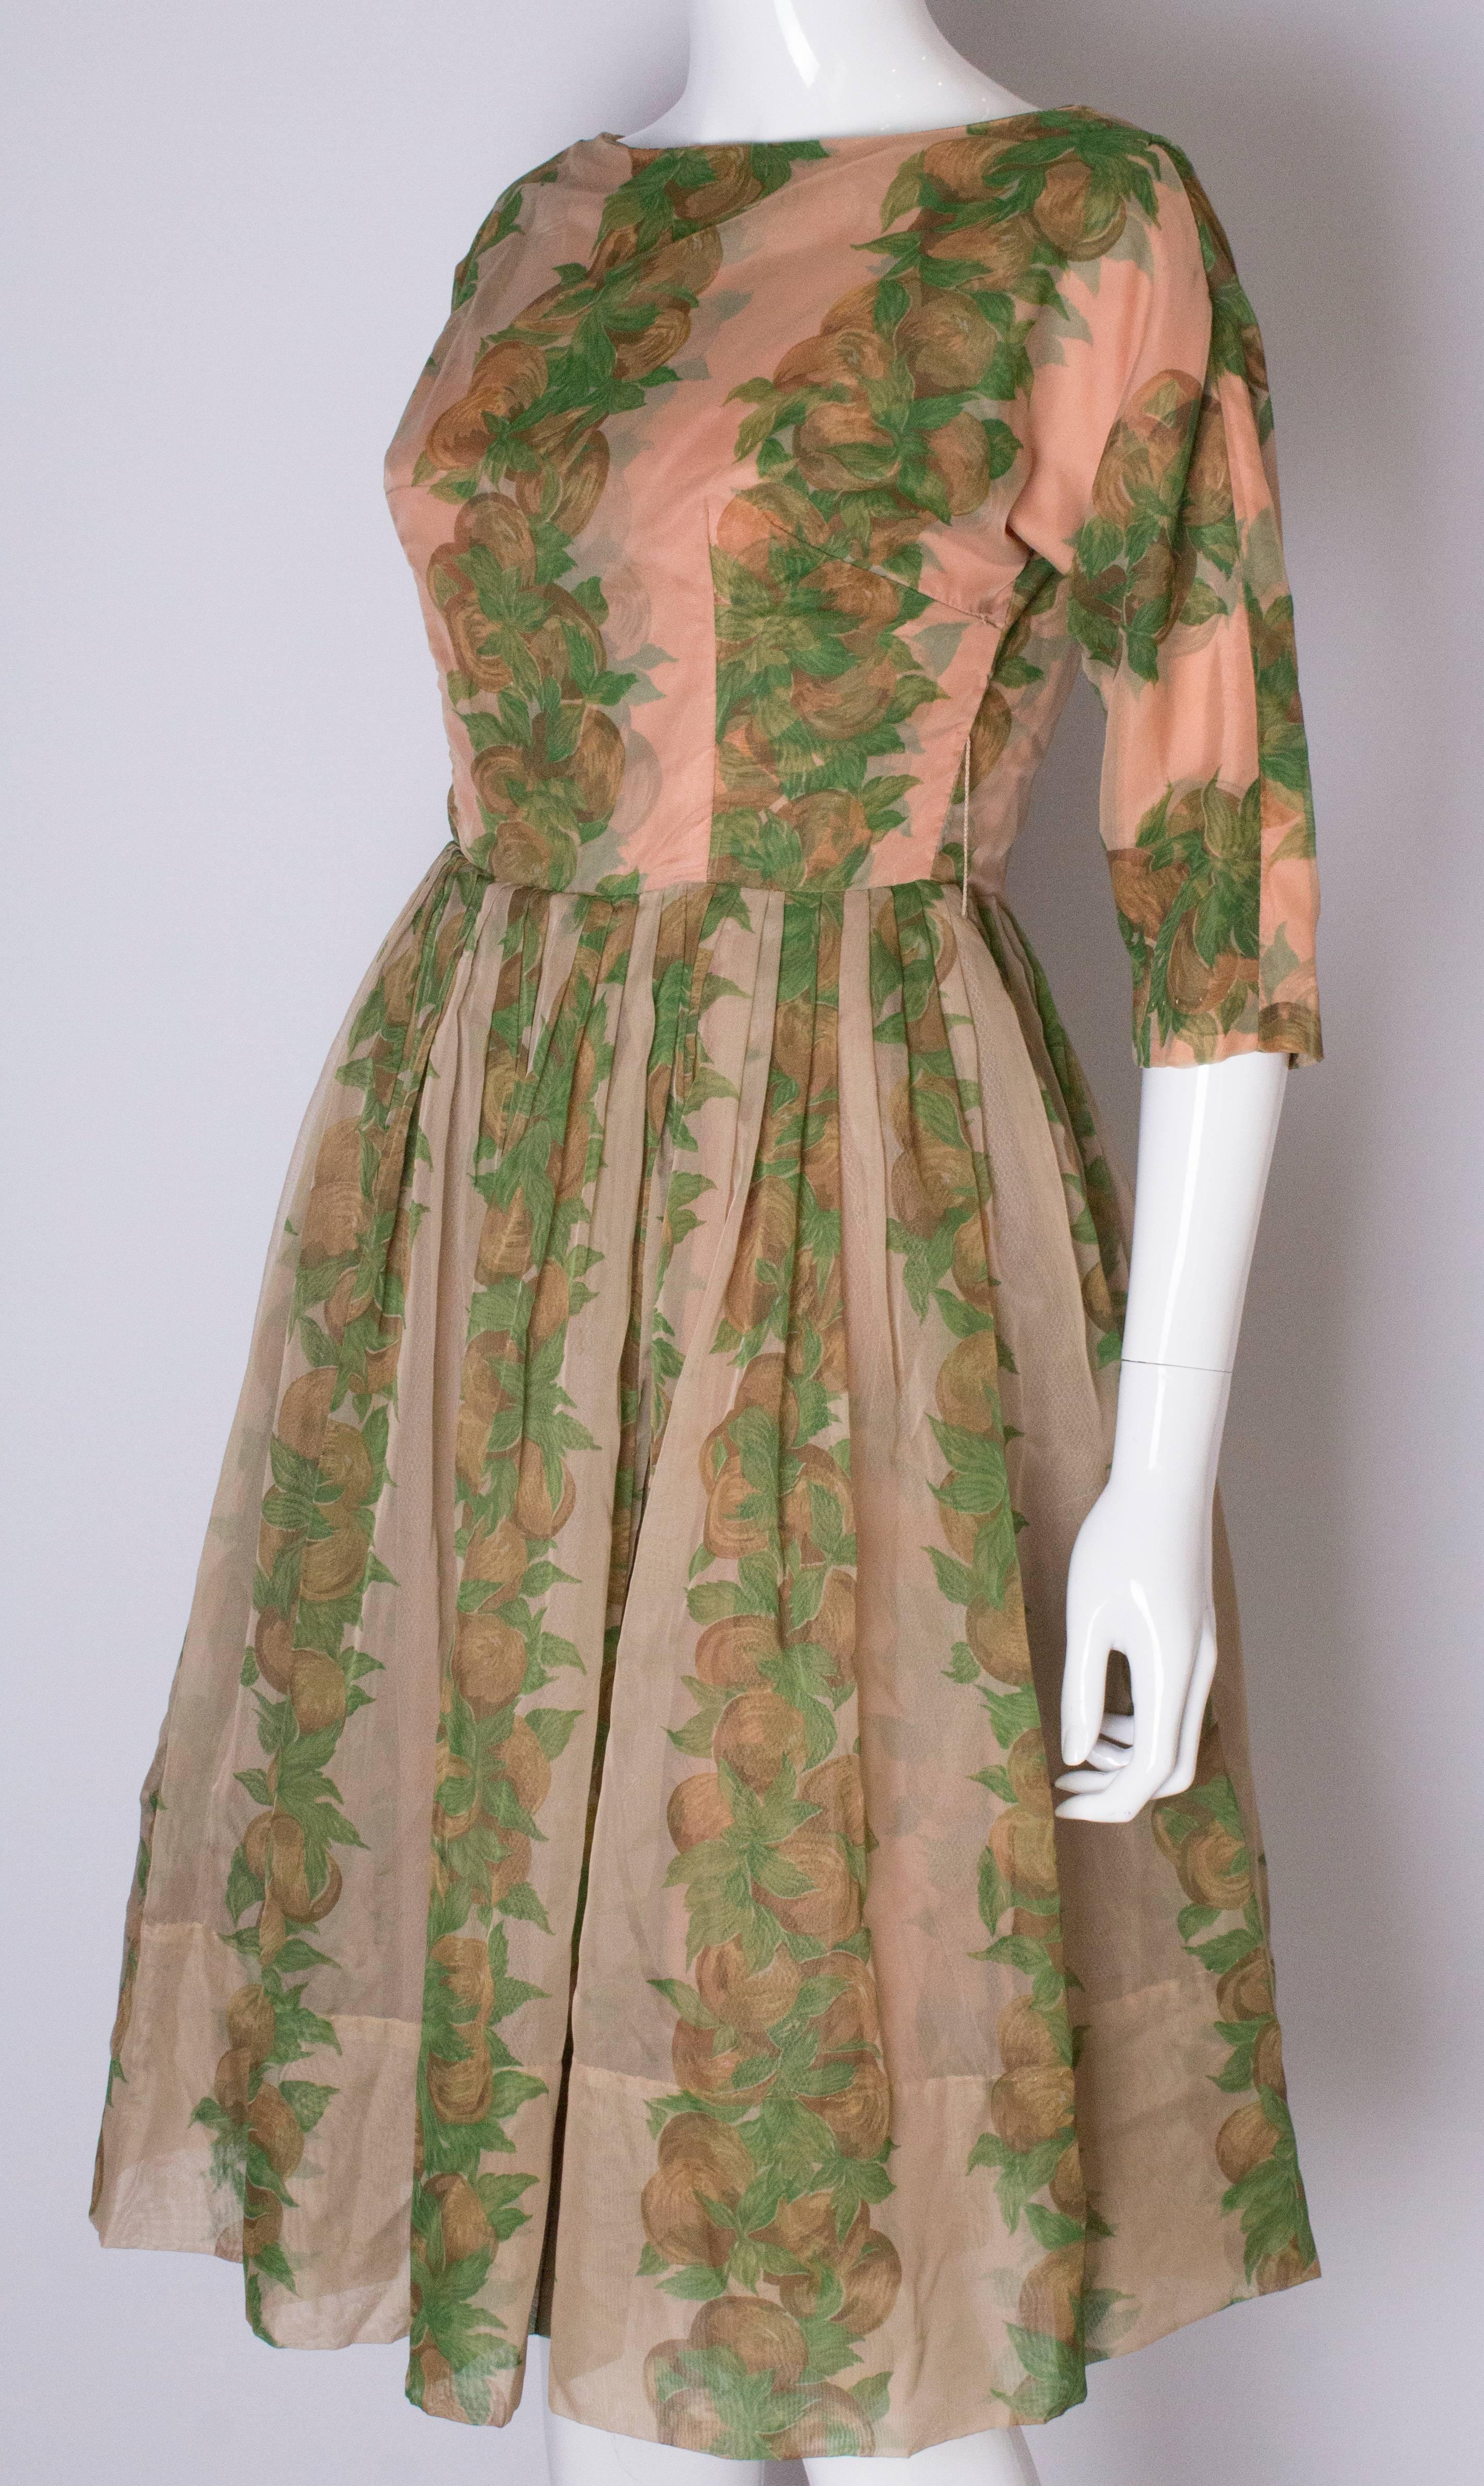 Women's A Vintage 1950s Apricot, Green and Brown print swing cinch party dress